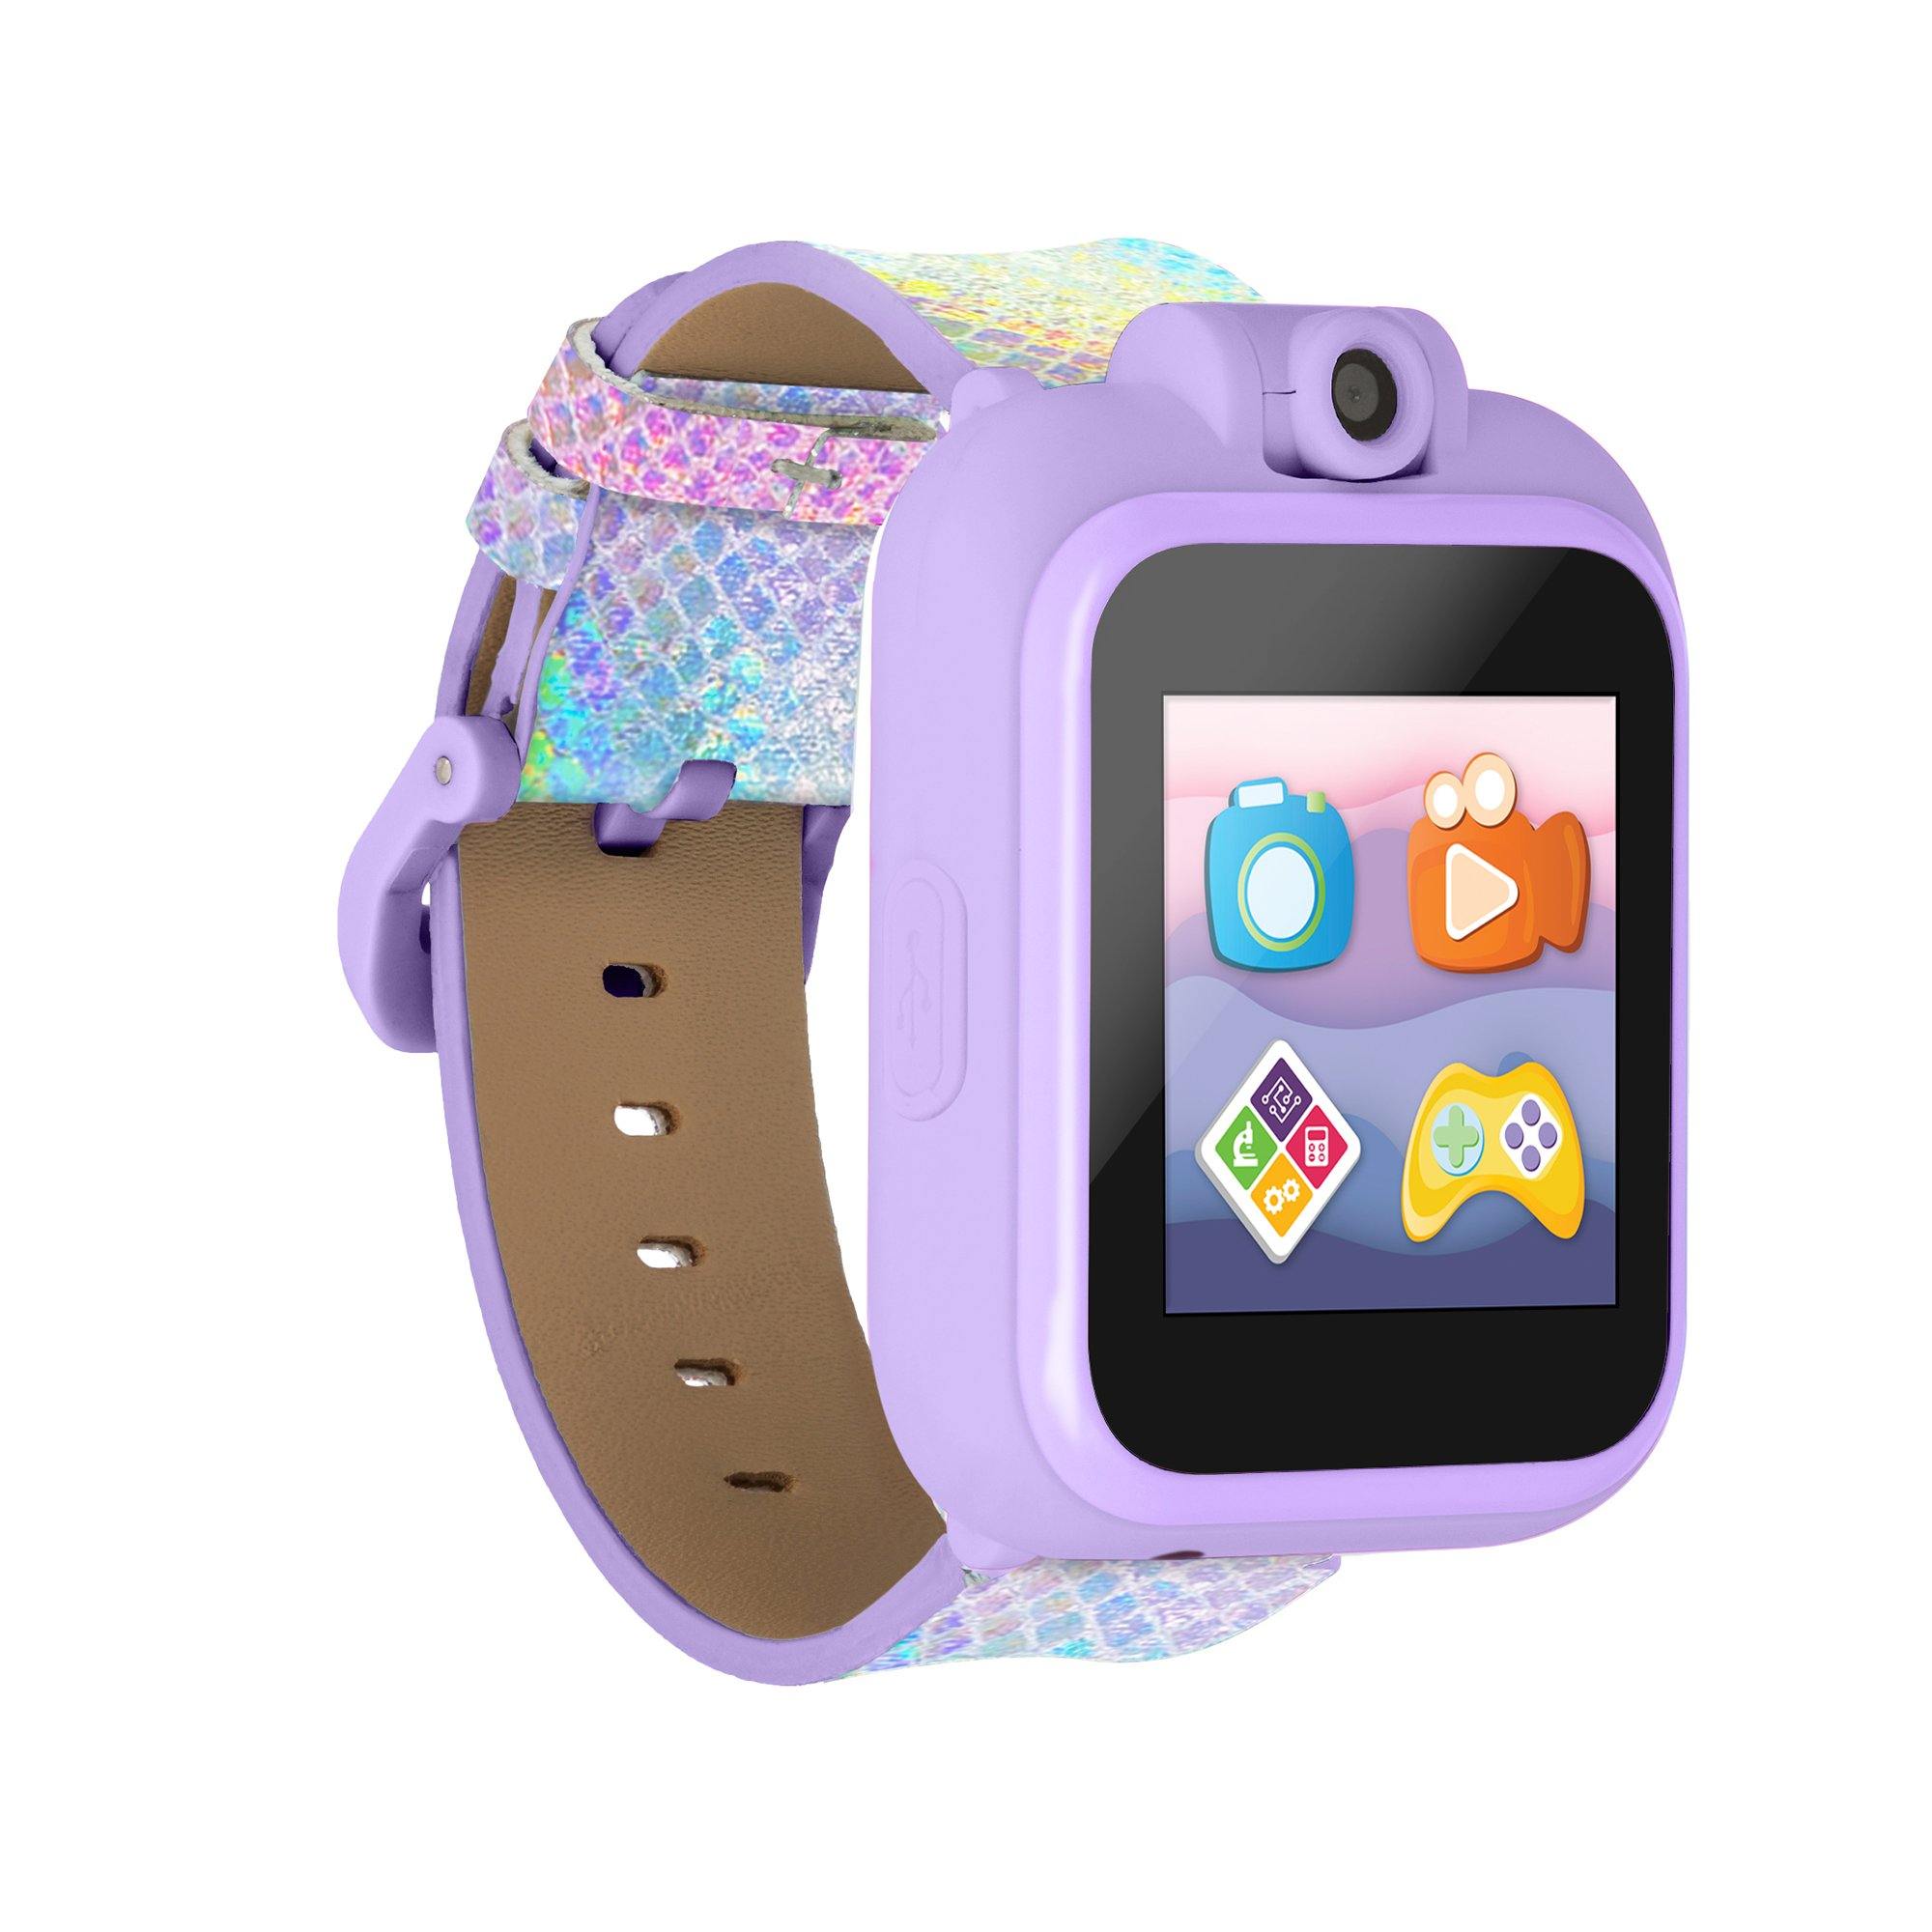 PlayZoom 2 Kids Smartwatch: Textured Holographic affordable smart watch